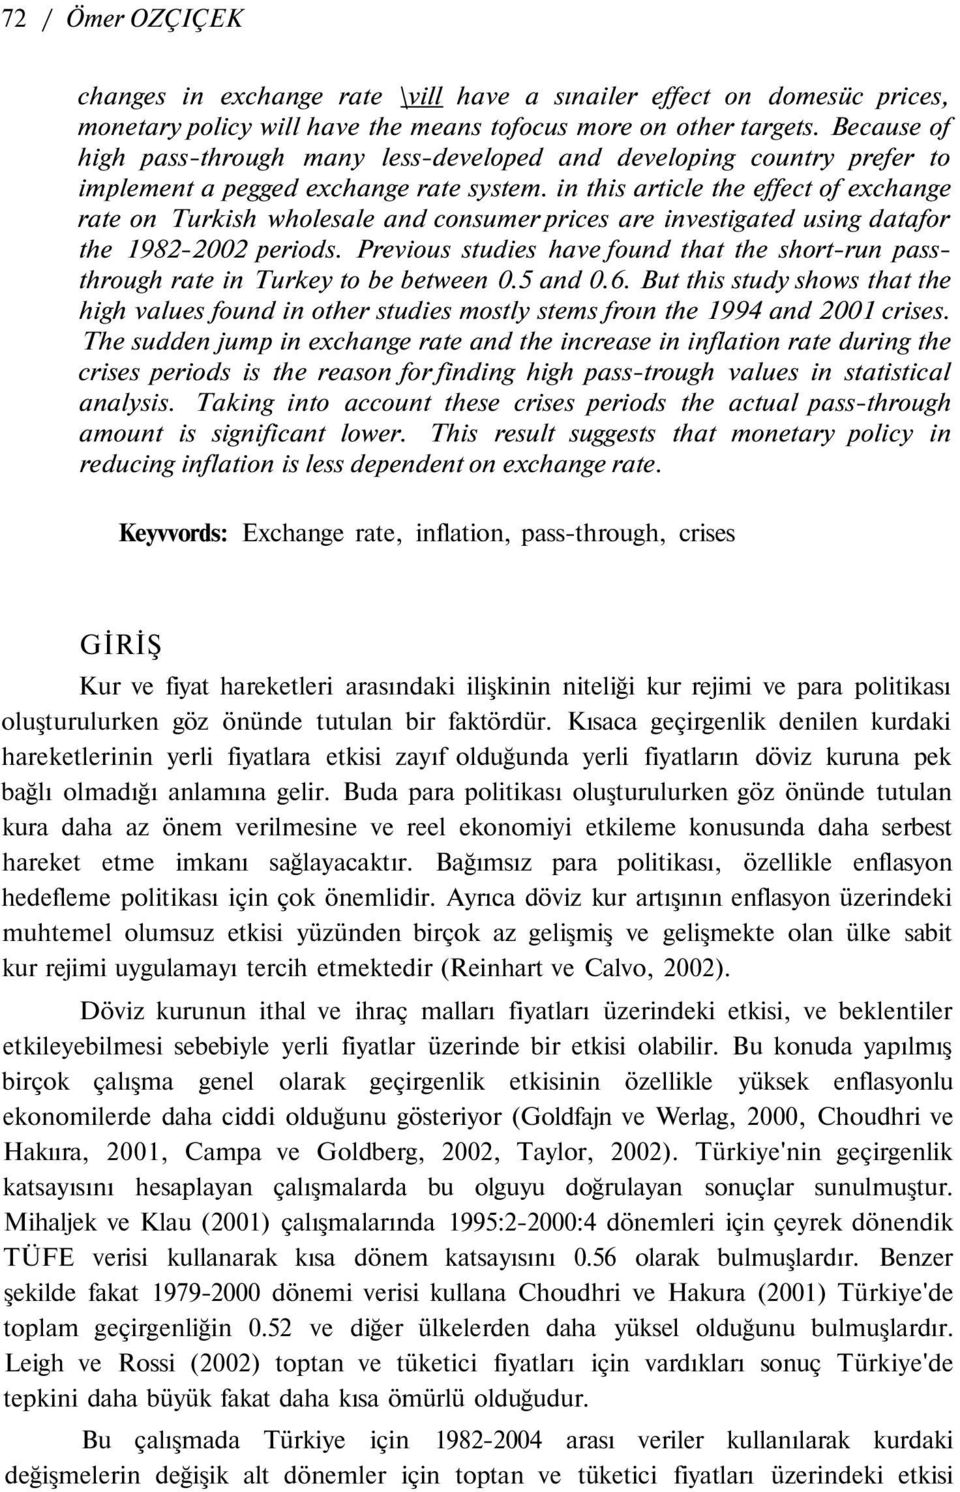 in this article the effect of exchange rate on Turkish wholesale and consumer prices are investigated using datafor the 1982-2002 periods.